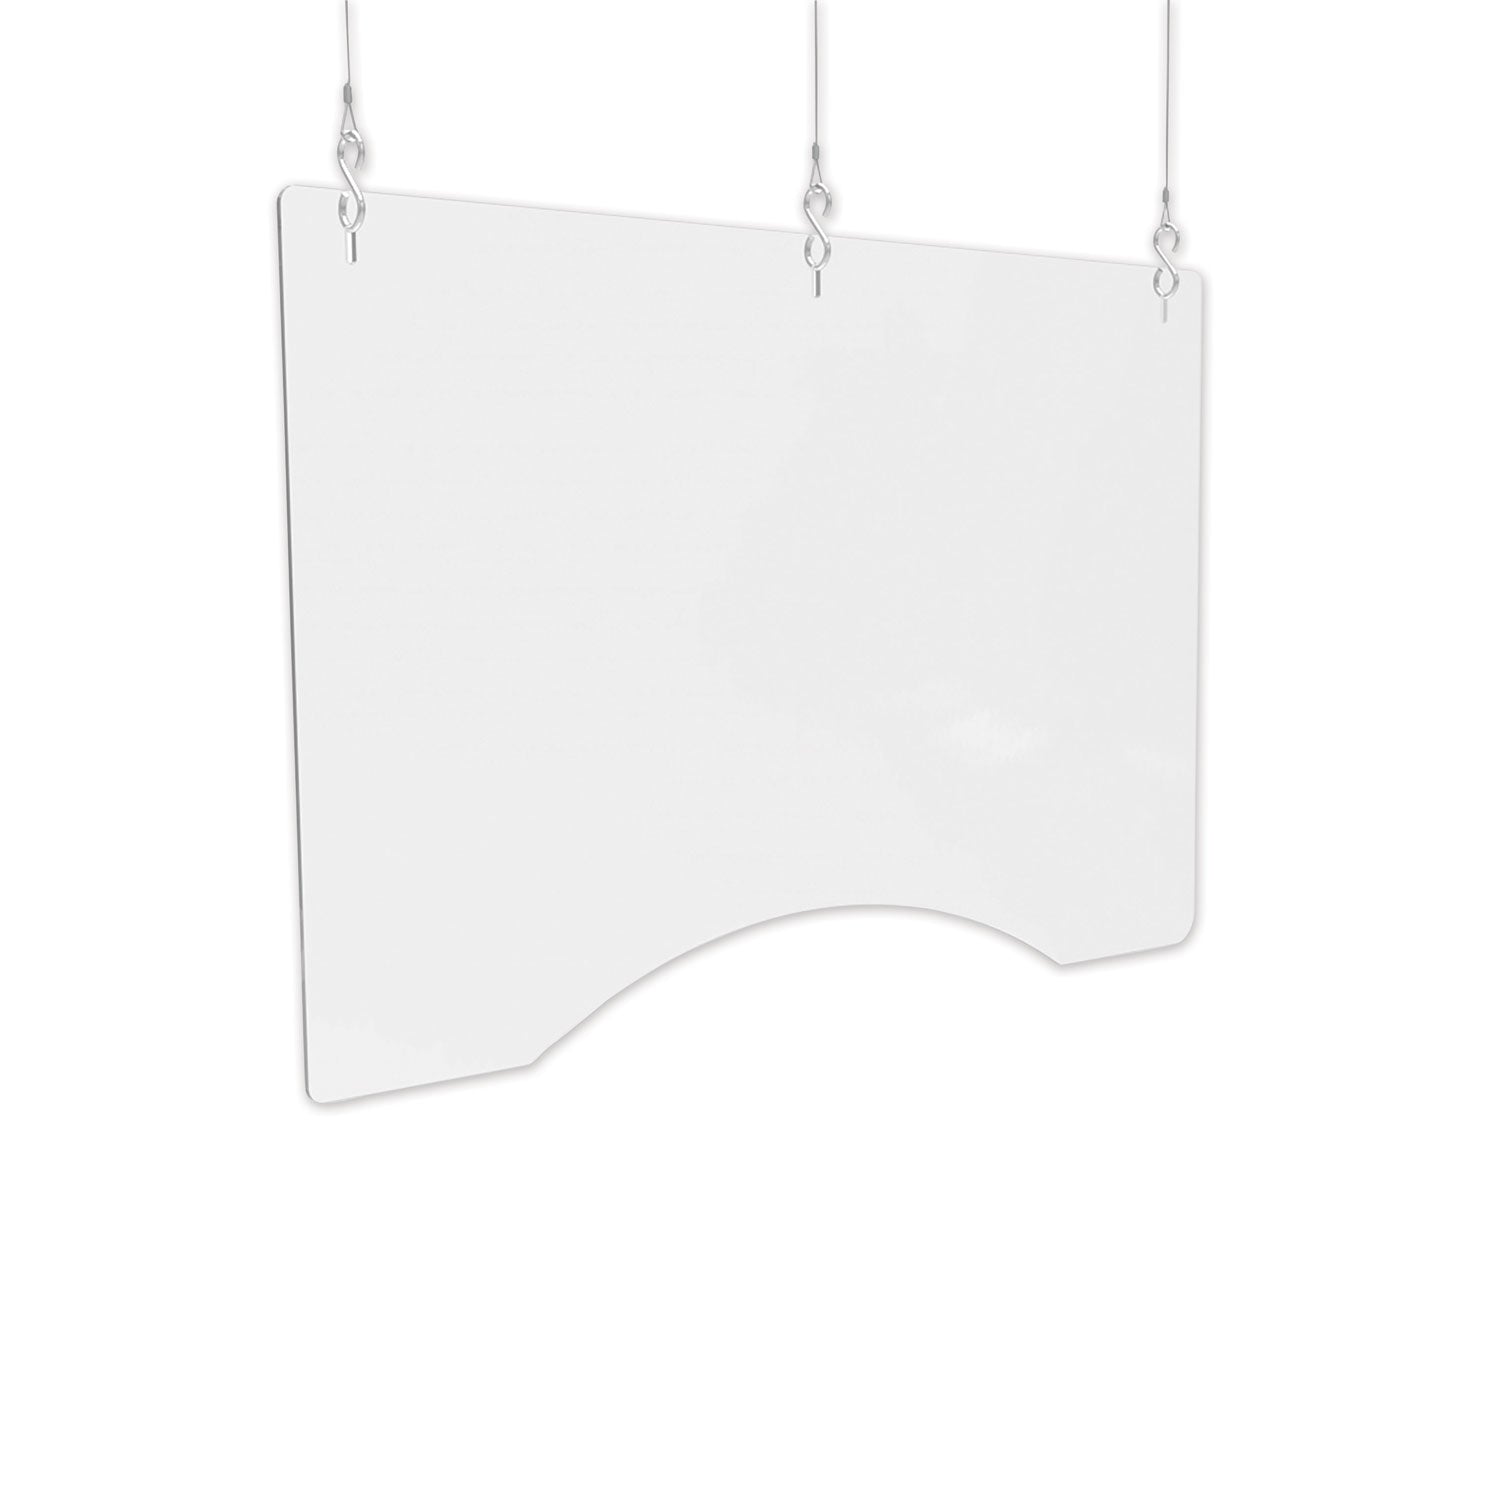 hanging-barrier-3575-x-24-acrylic-clear-2-carton_defpbcha3624 - 1